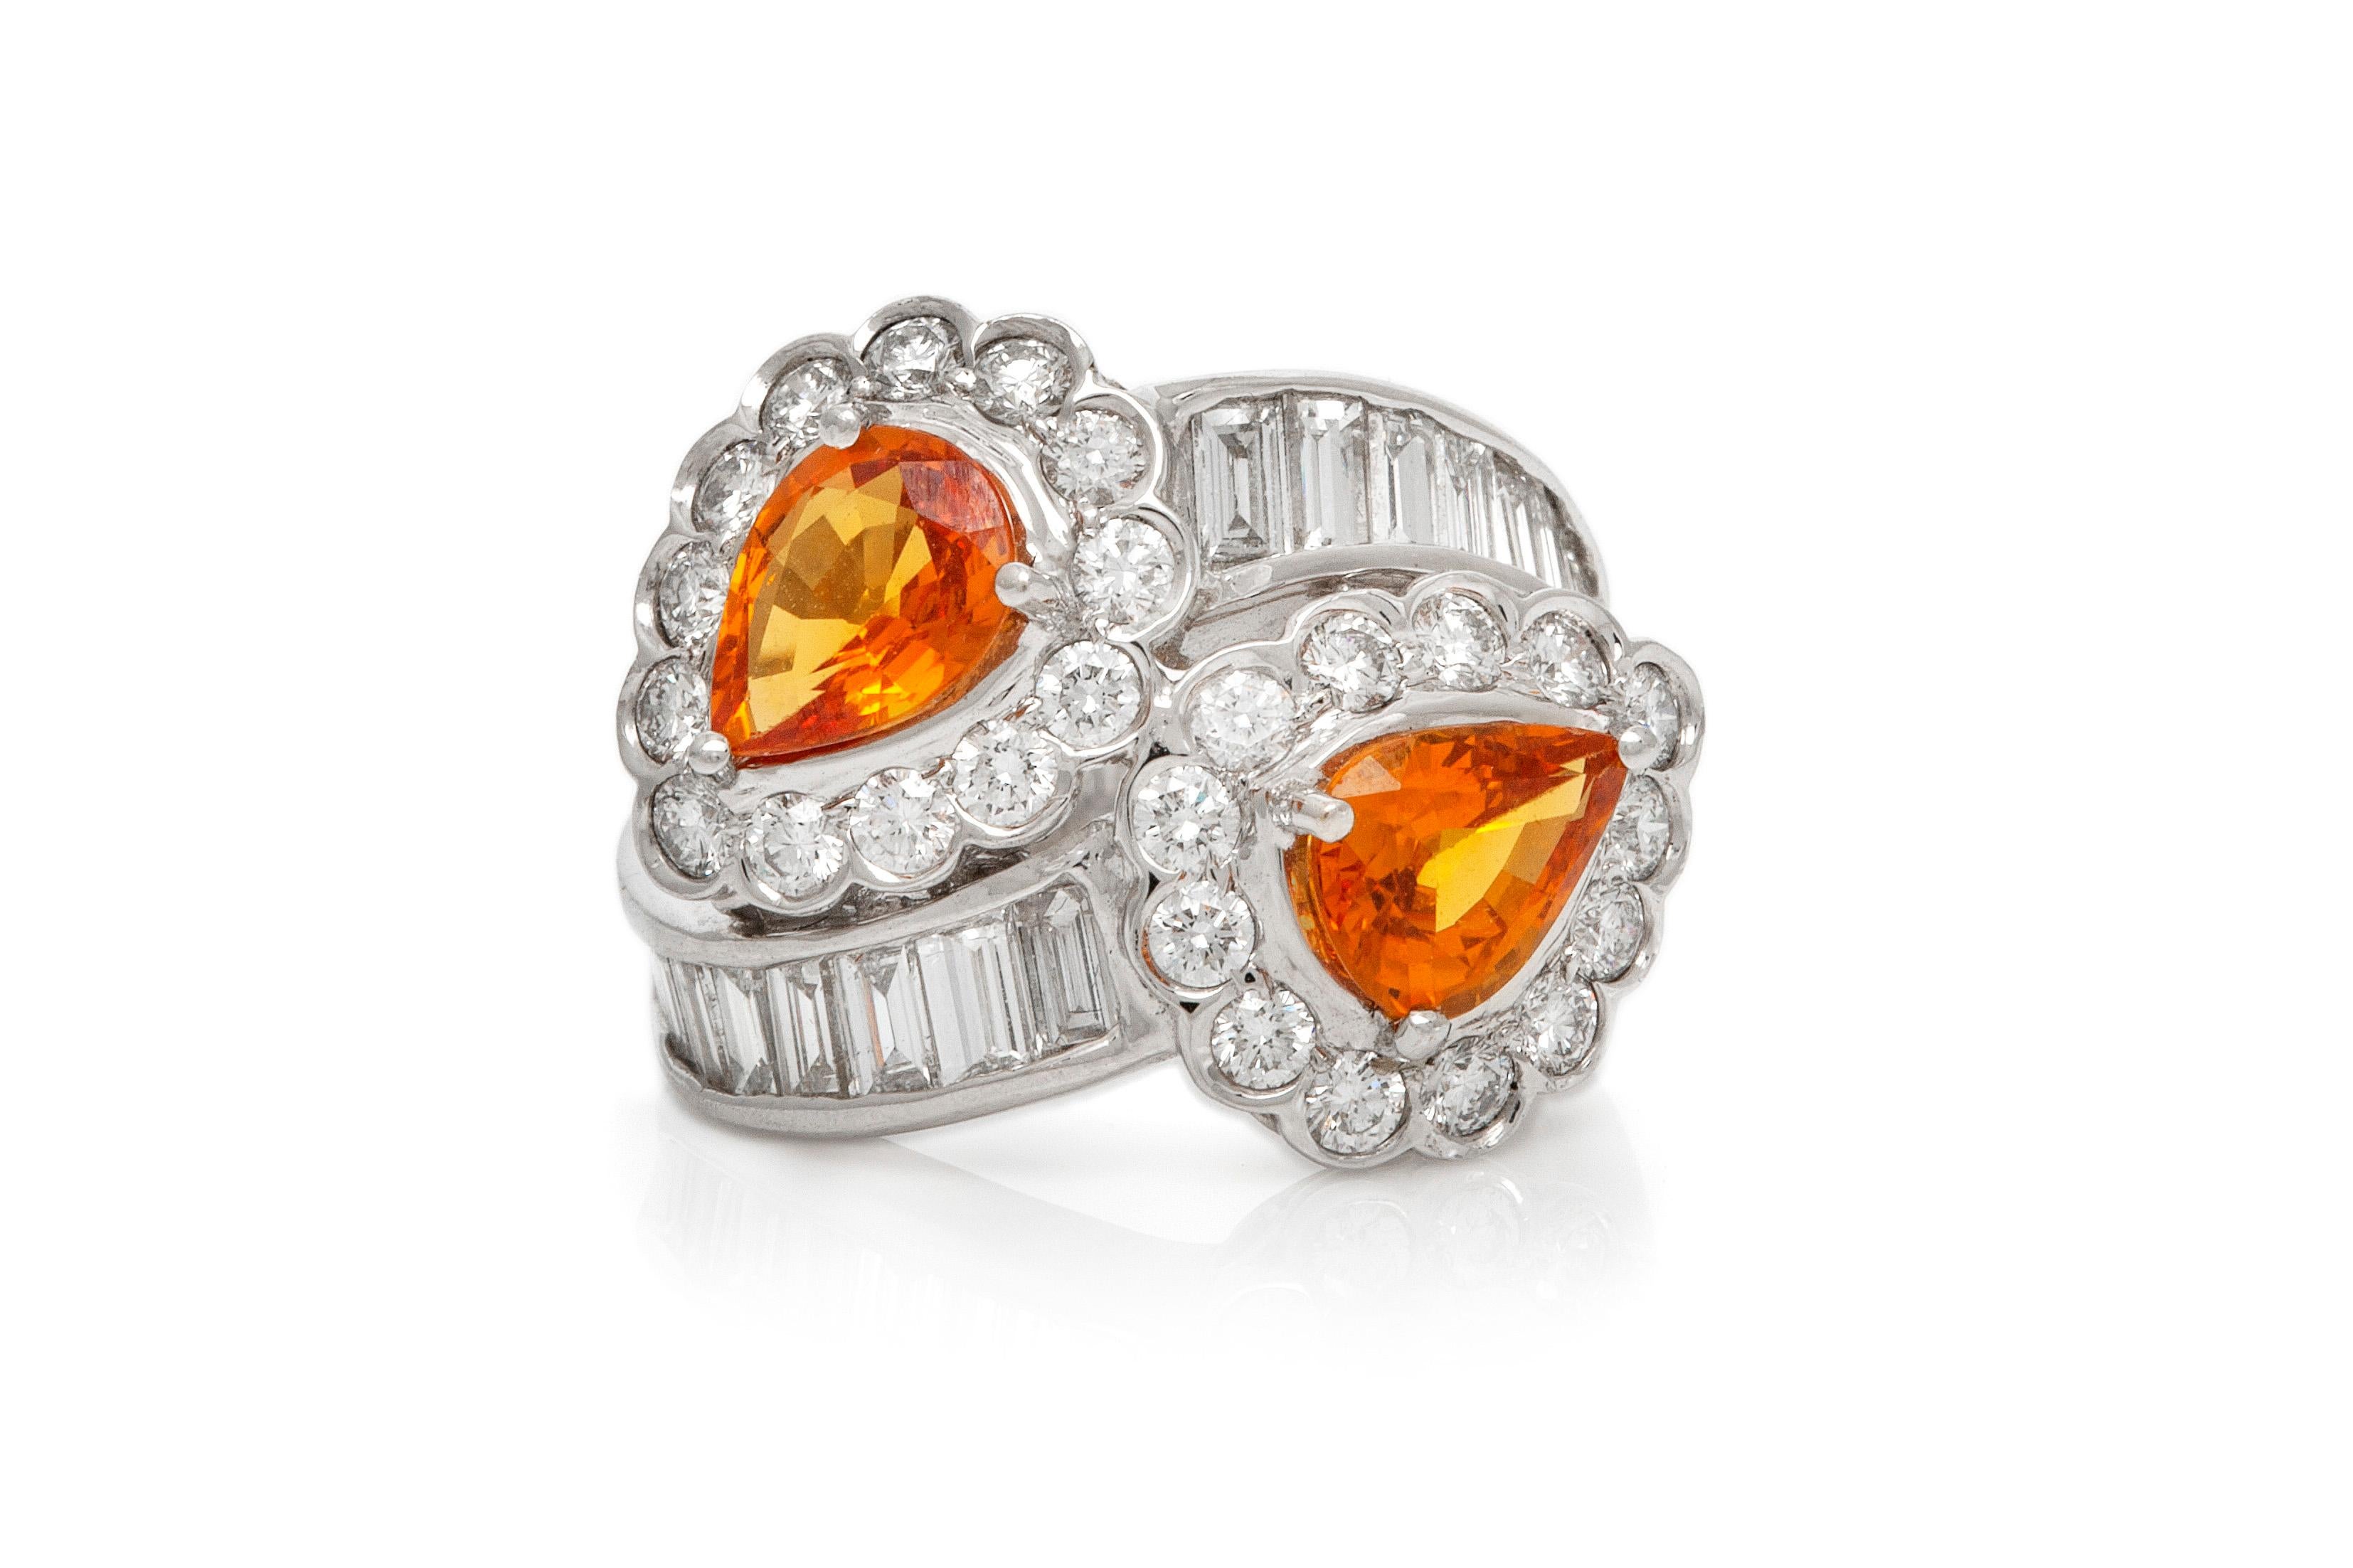 The ring is finely crafted in 18k white gold with orange sapphire weighing approximately total of 2.40 carat and diamonds weighing approximately total of 2.02 carat.
